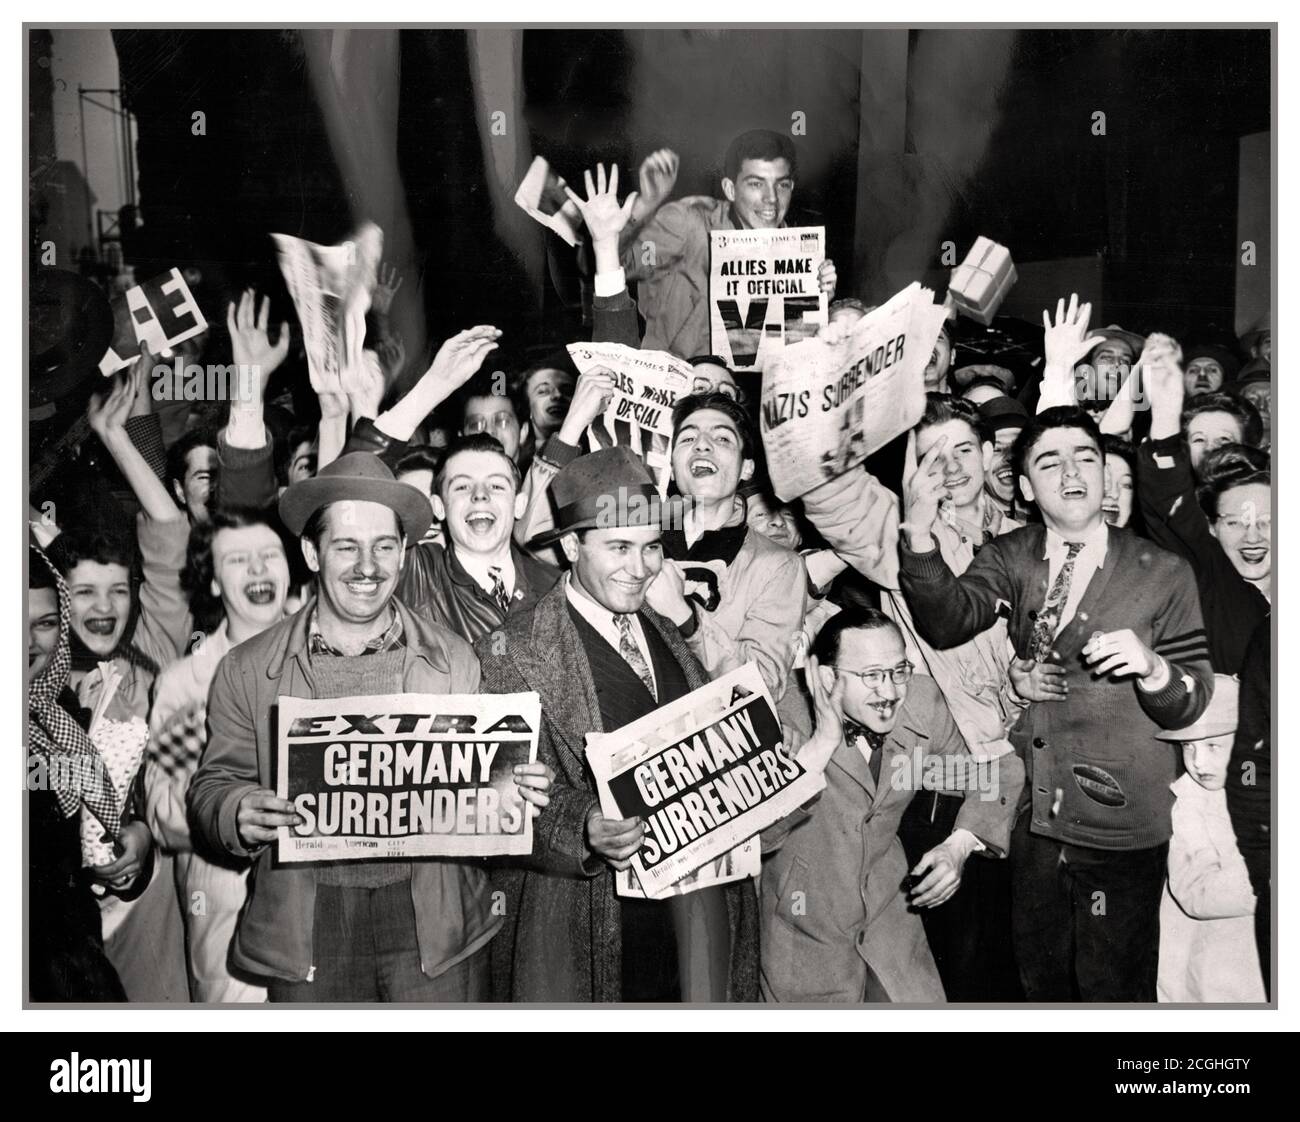 VE DAY 1945 Archive VE day WW2 celebrations with Americans holding newspaper headlines proclaiming ‘Germany Surrenders’  VE Day Friday 8 May 1945 Nazi Germany's formal surrender towards the end of the Second World War. On VE (Victory in Europe) Day in 1945, millions took to the streets to celebrate peace in our time. Stock Photo